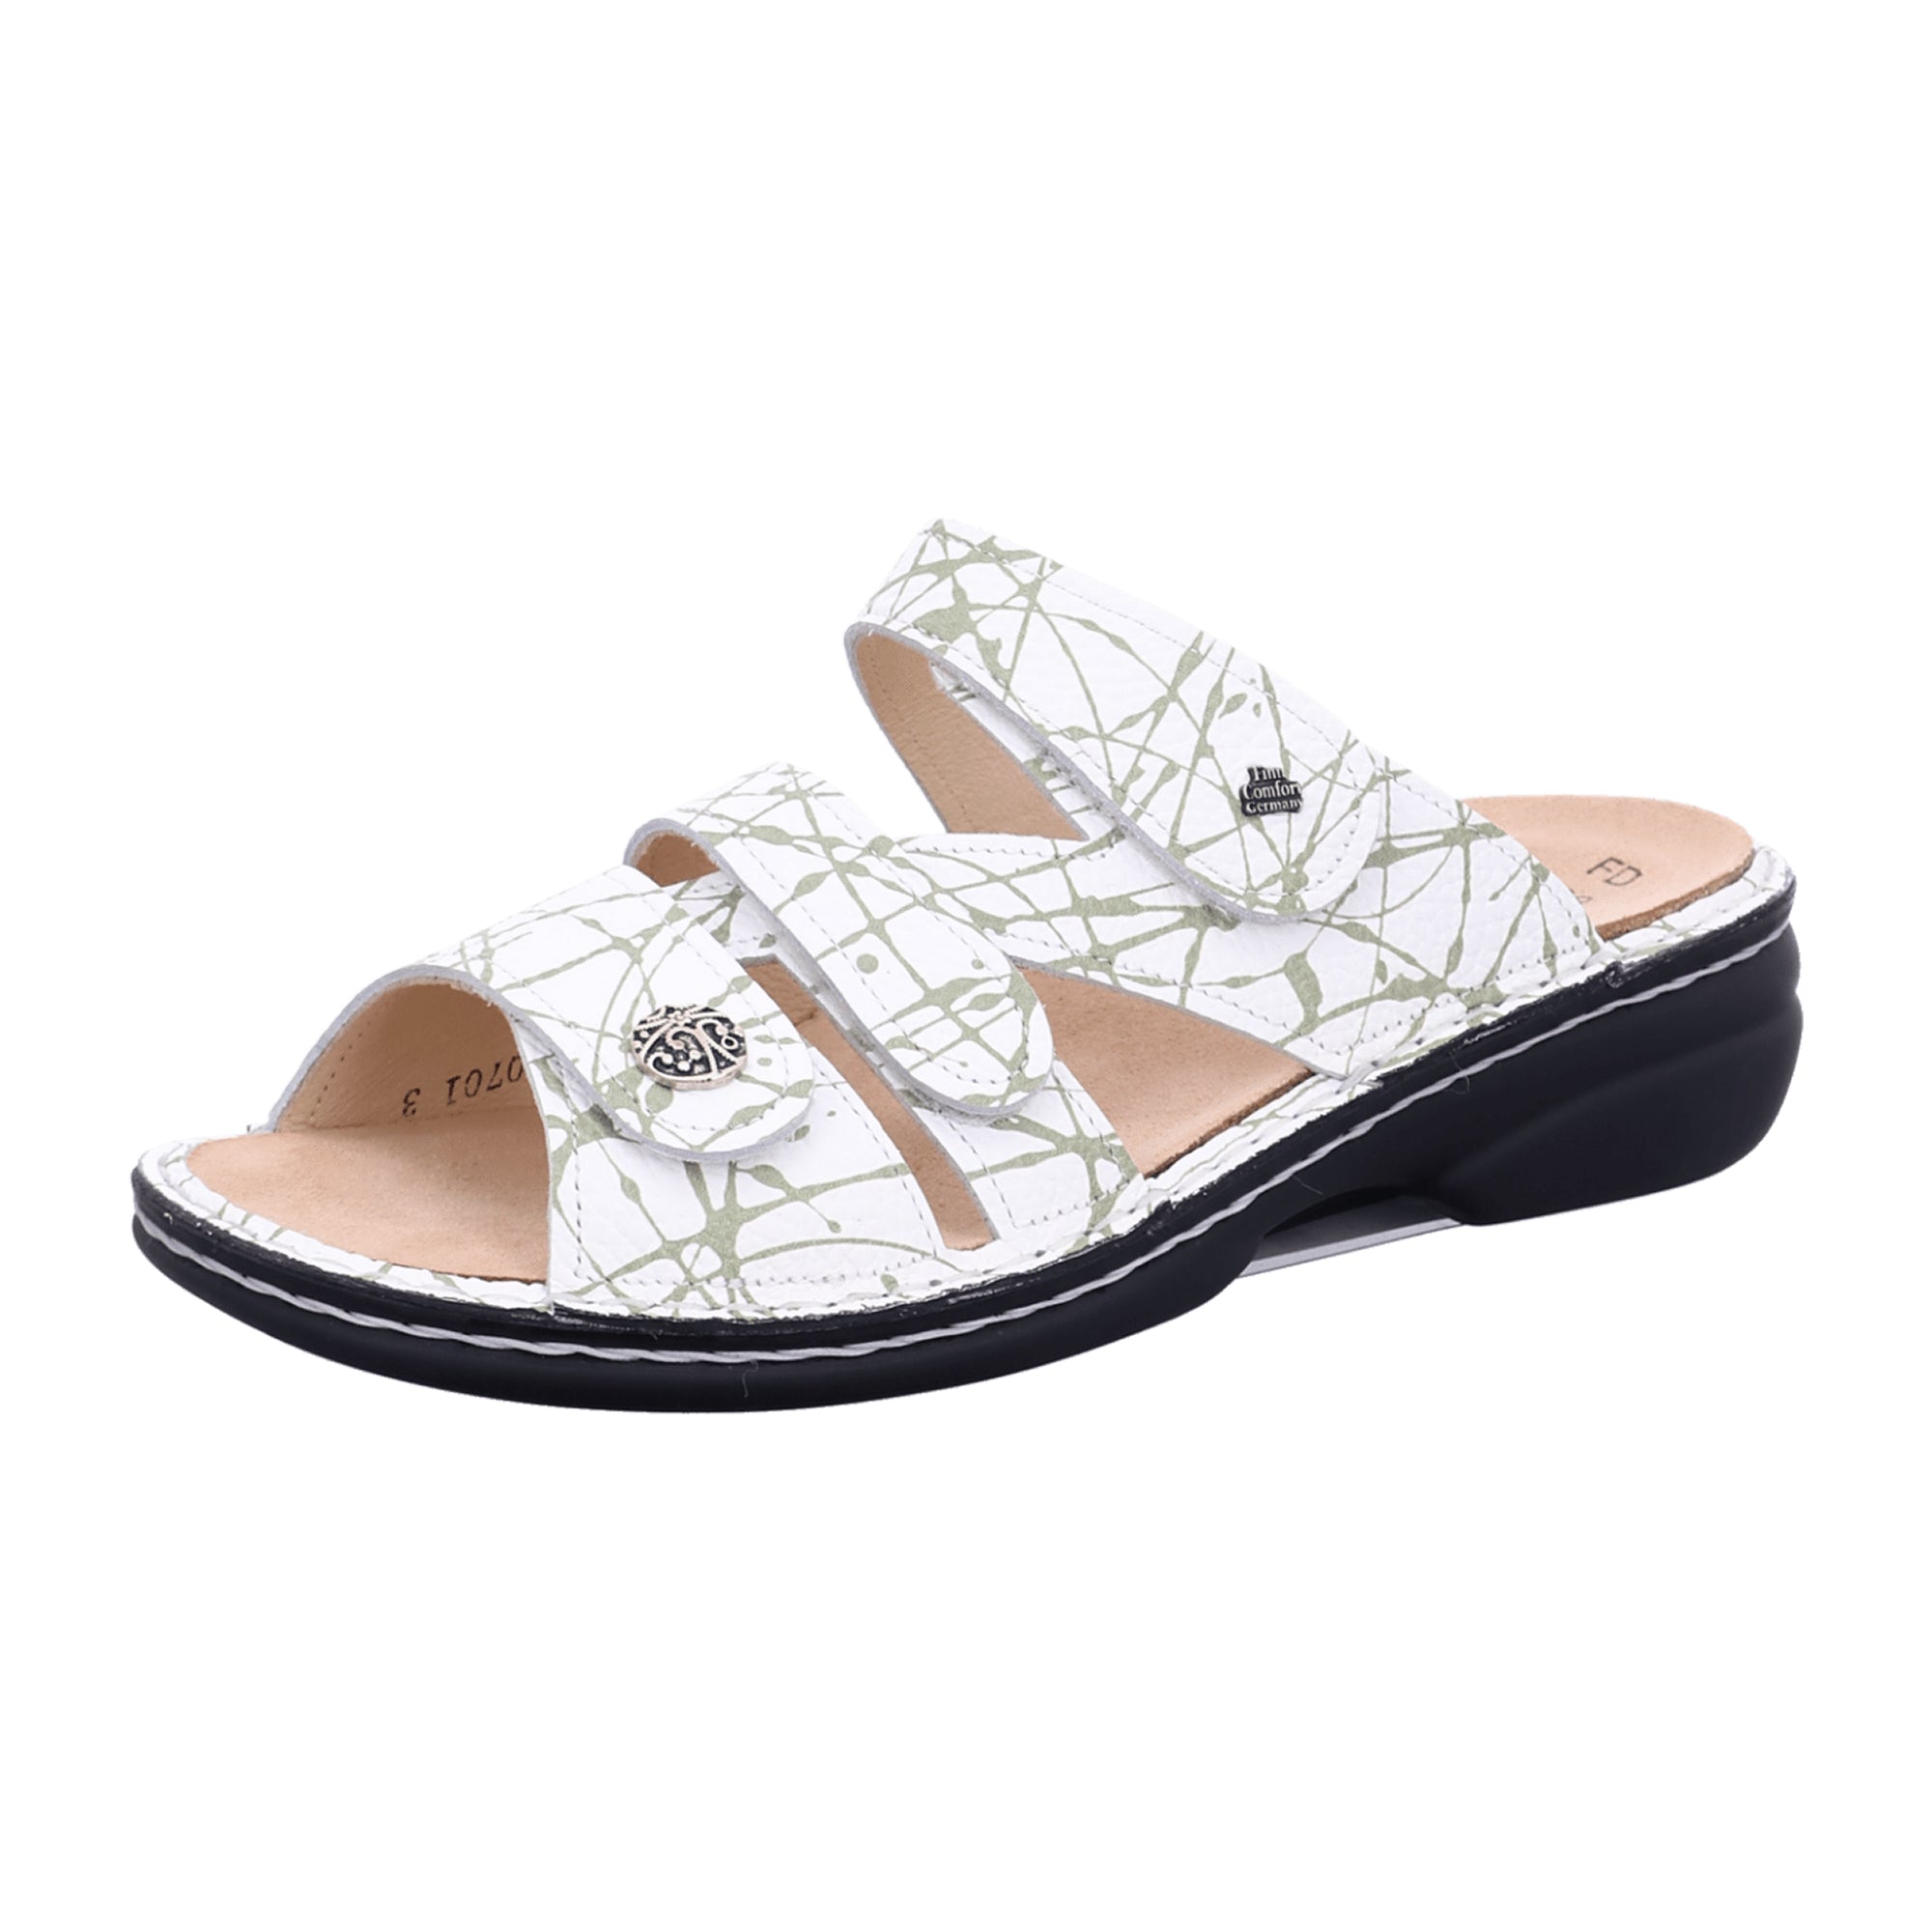 Finn Comfort Ventura-Soft Women's White Leather Slides - Comfortable Summer Sandals with Soft Footbed